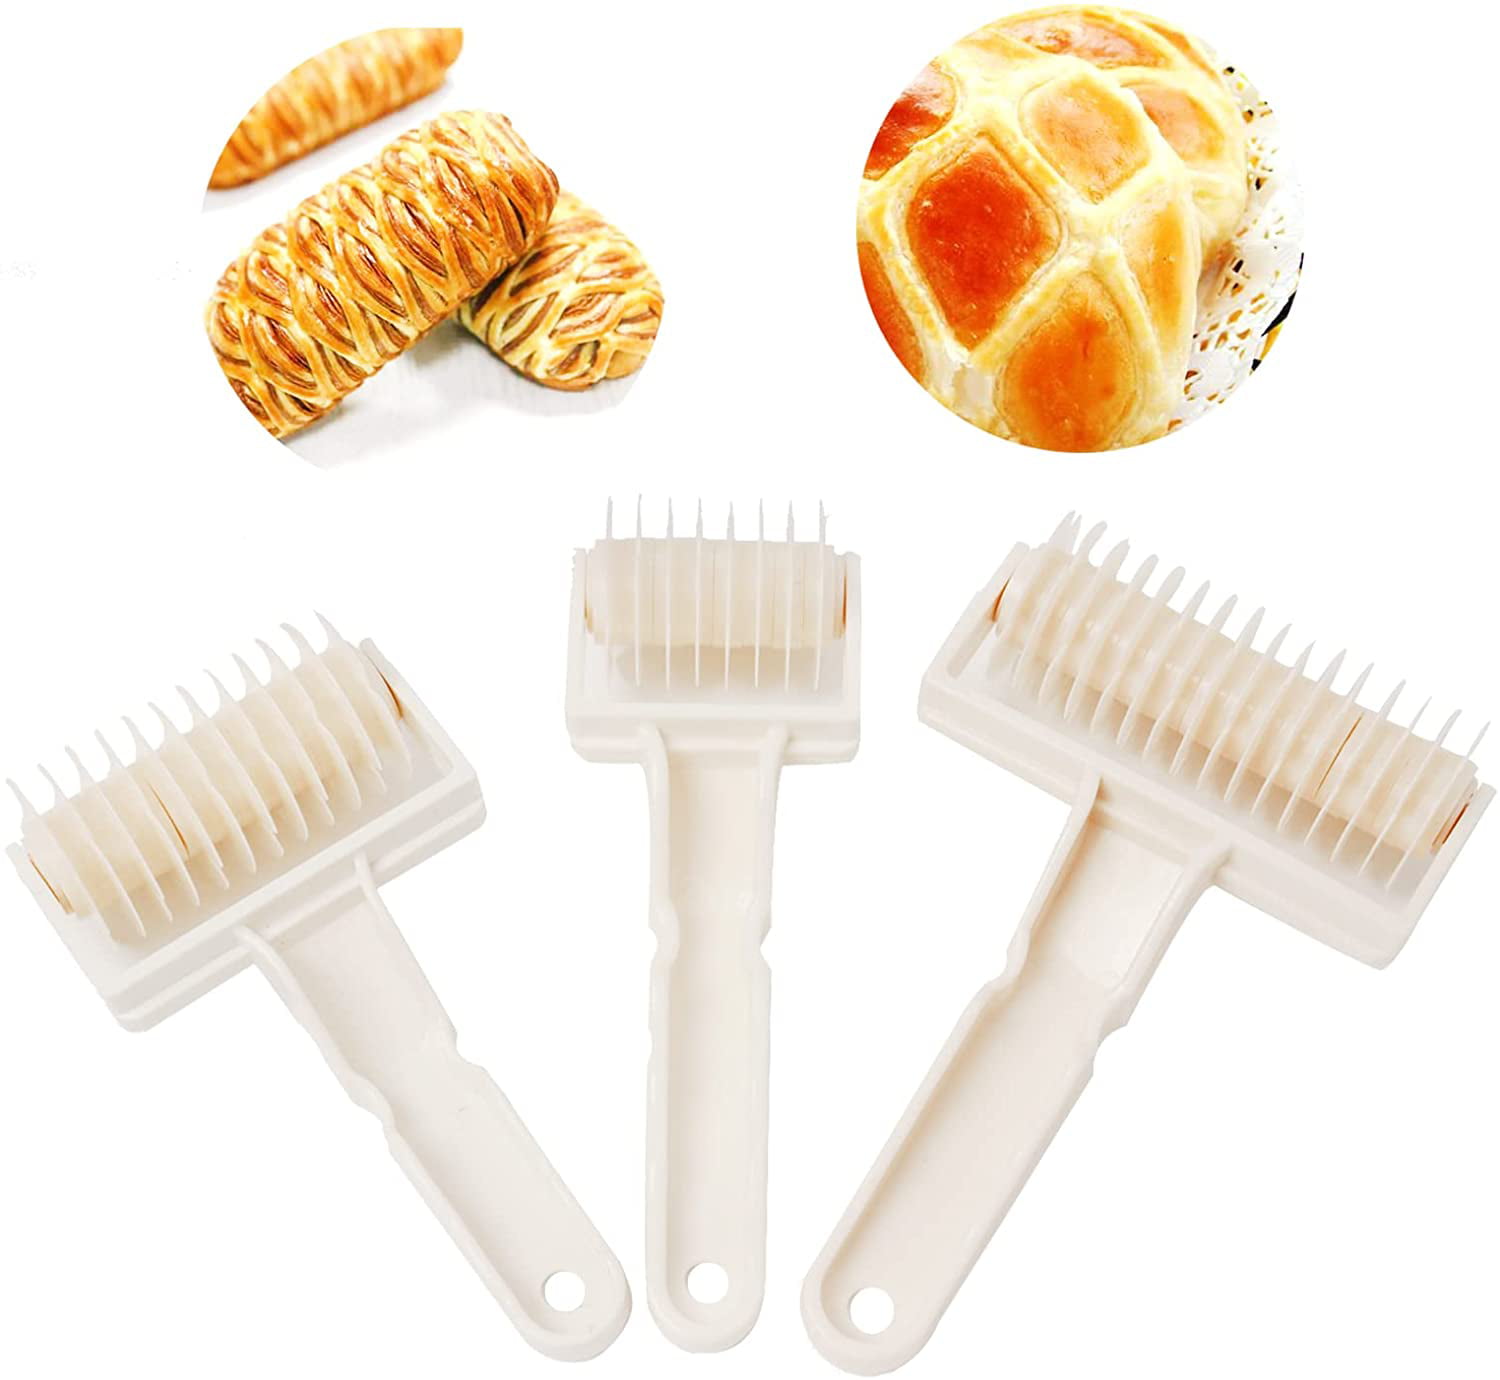 Rolling Pastry Lattice Cutter Roller Pie Baking Cookie Bread Pizza Dough Tool 